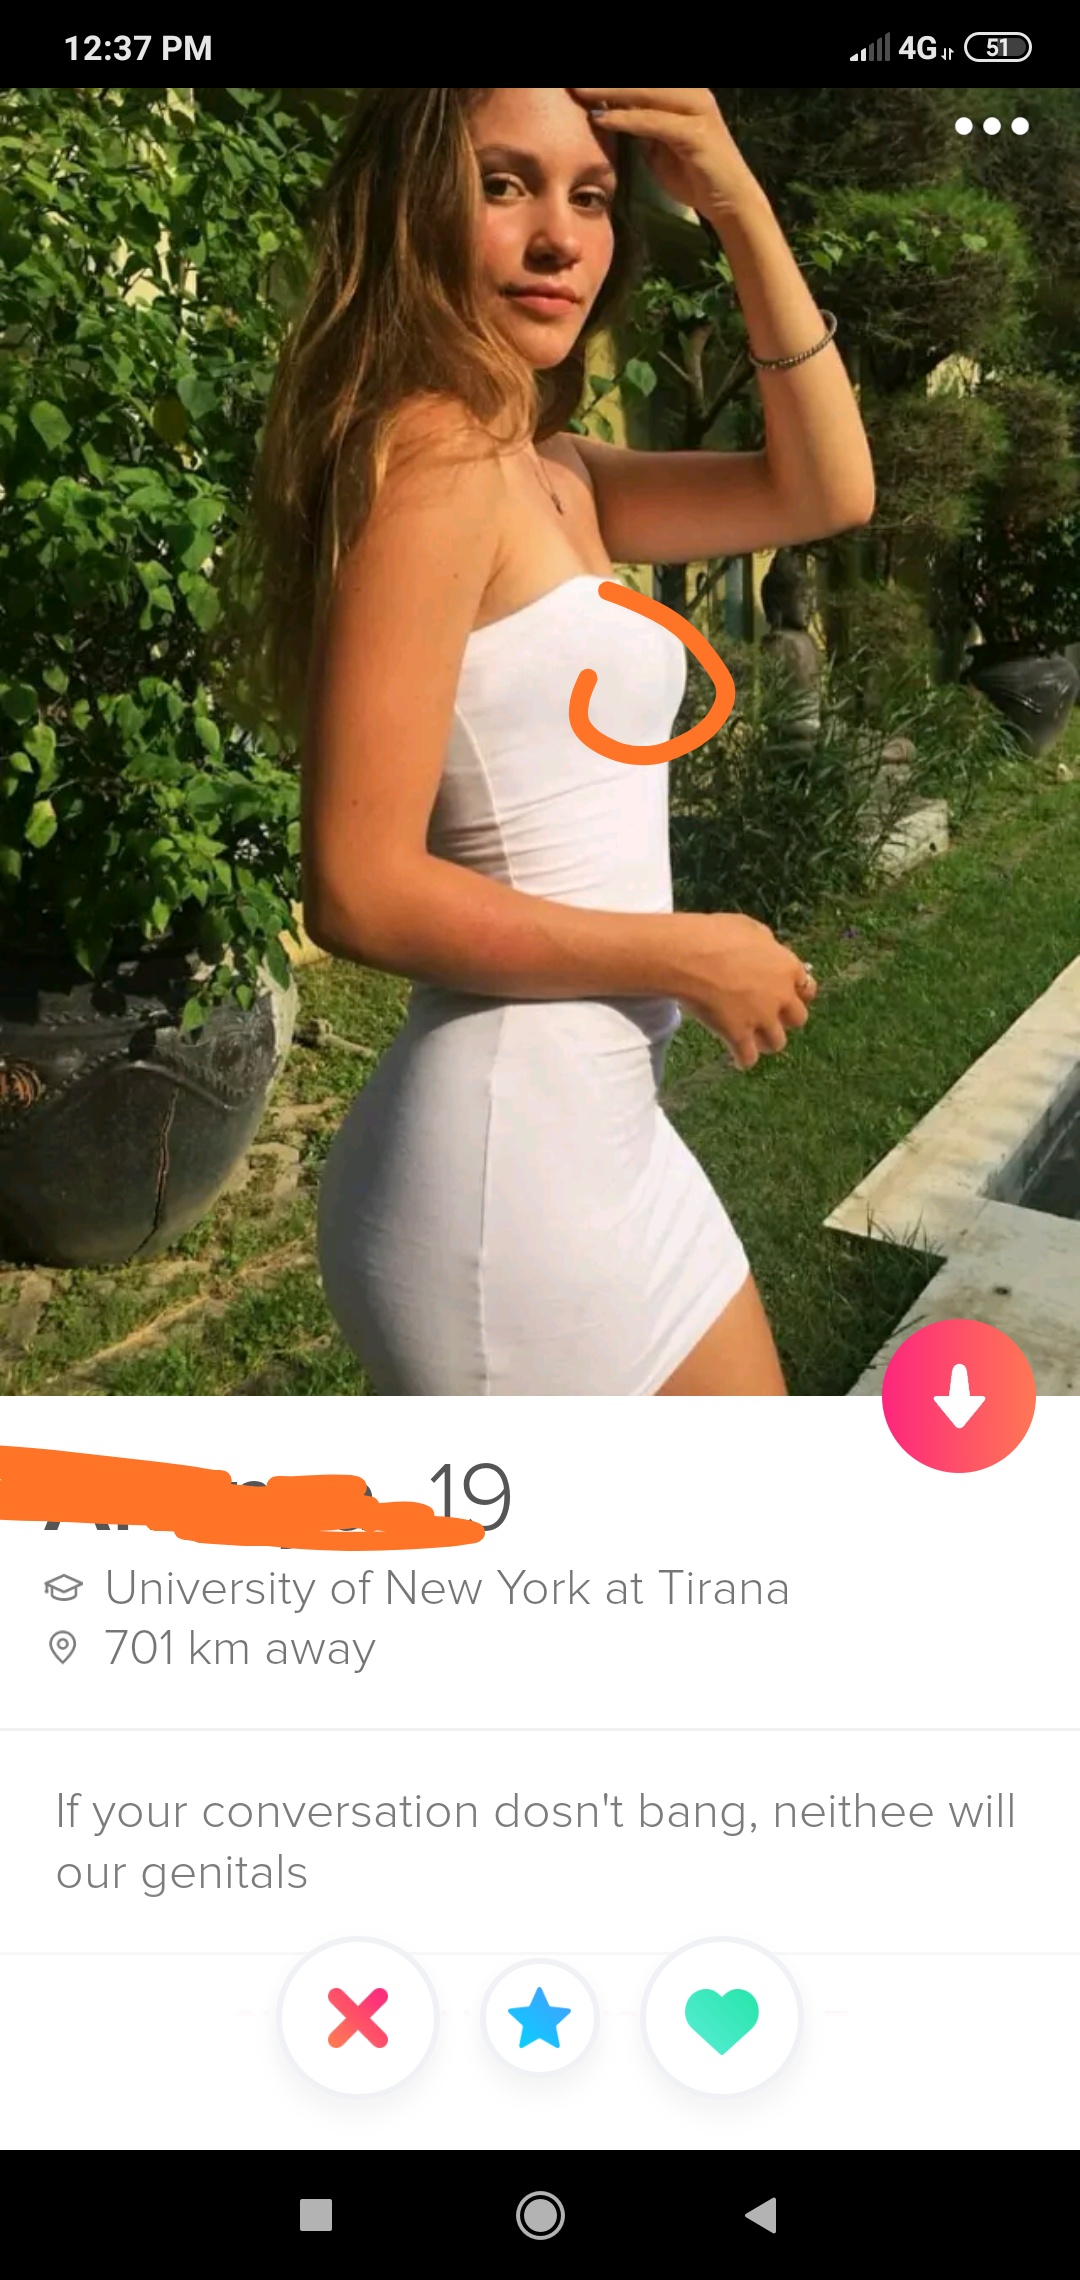 Shameless Tinder profile that says University of New York at Tirana 701 km away If your conversation dosn't bang, nesthee will our genitals